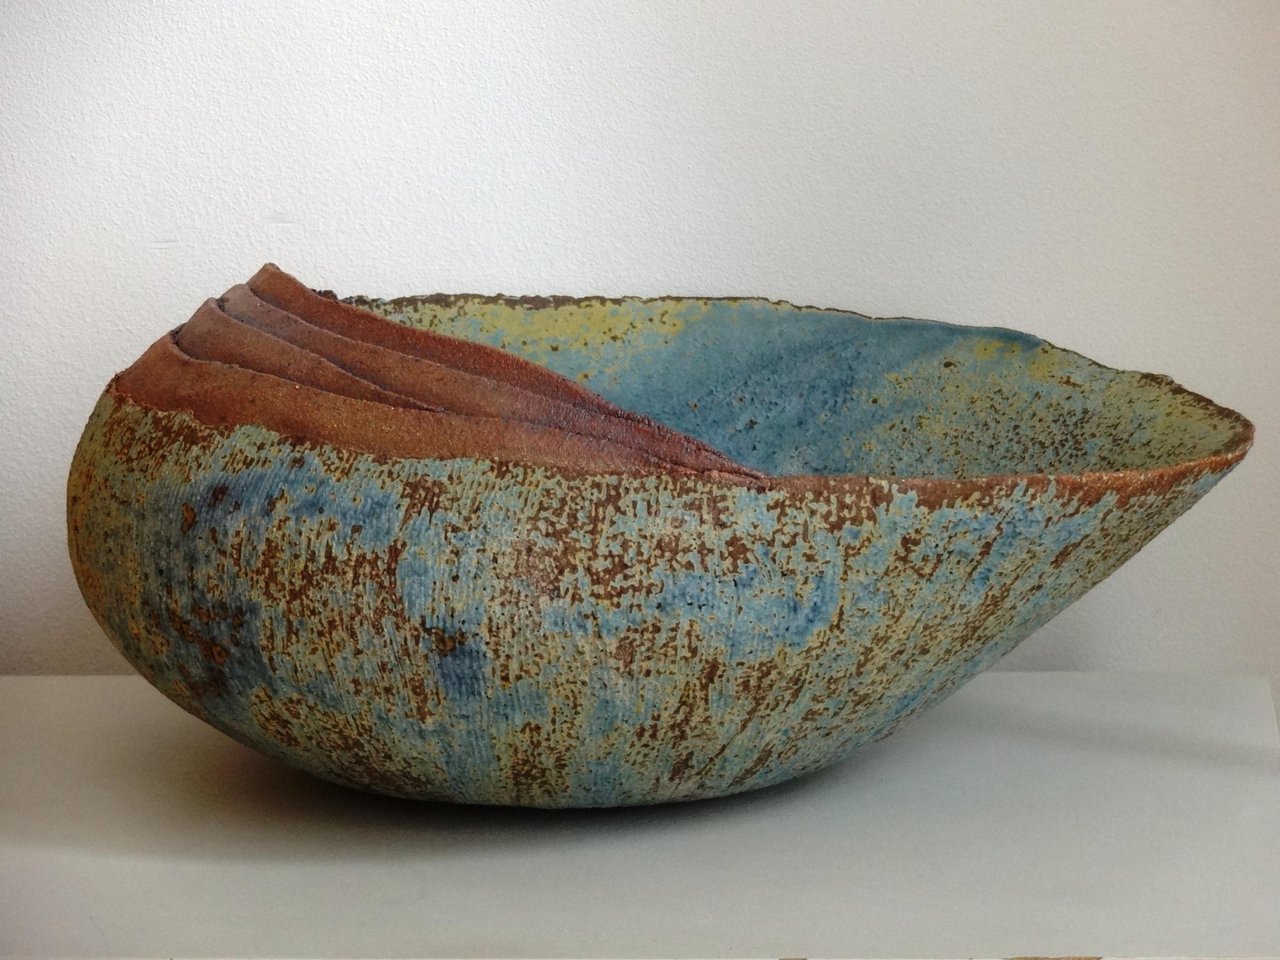 "Probably more important than our vote the other day"
Jasmina Ajzenkol is our current Visitor's choice! #ceramics http://t.co/aNJ9MrXxaU